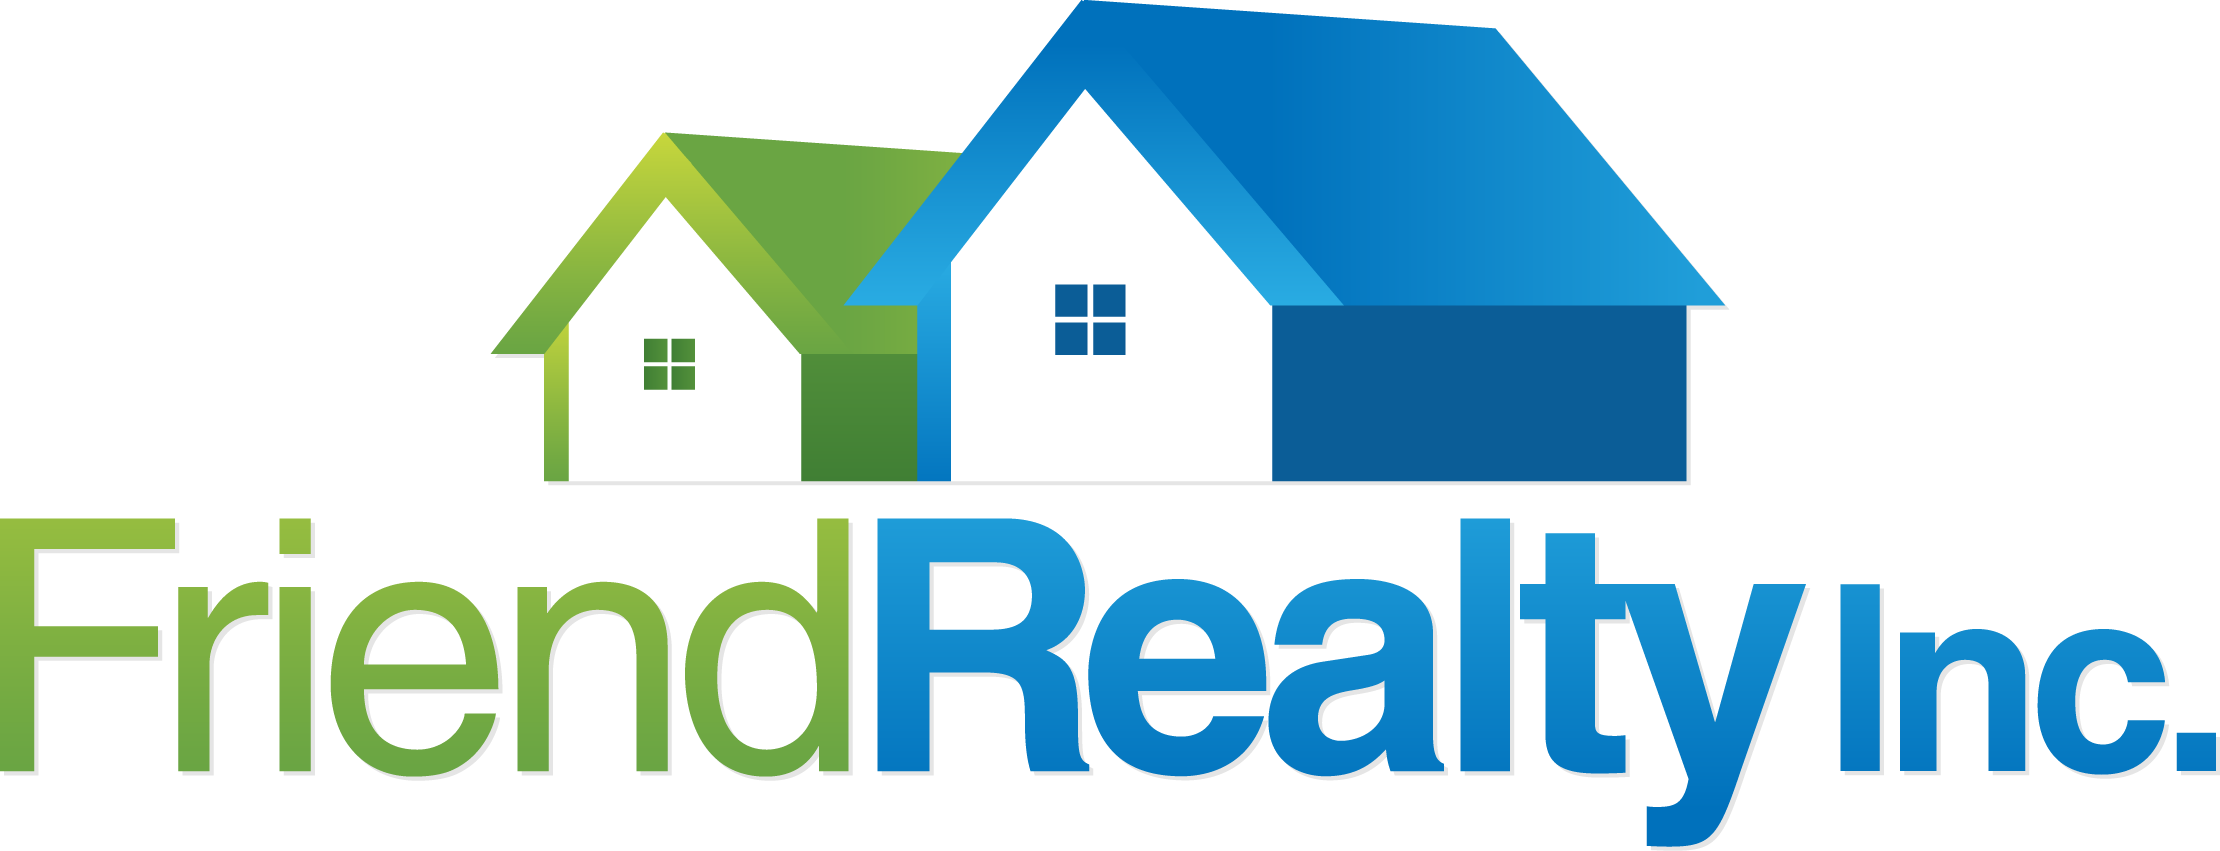 Friend Realty Inc - Realty Logo Png (2220x851)